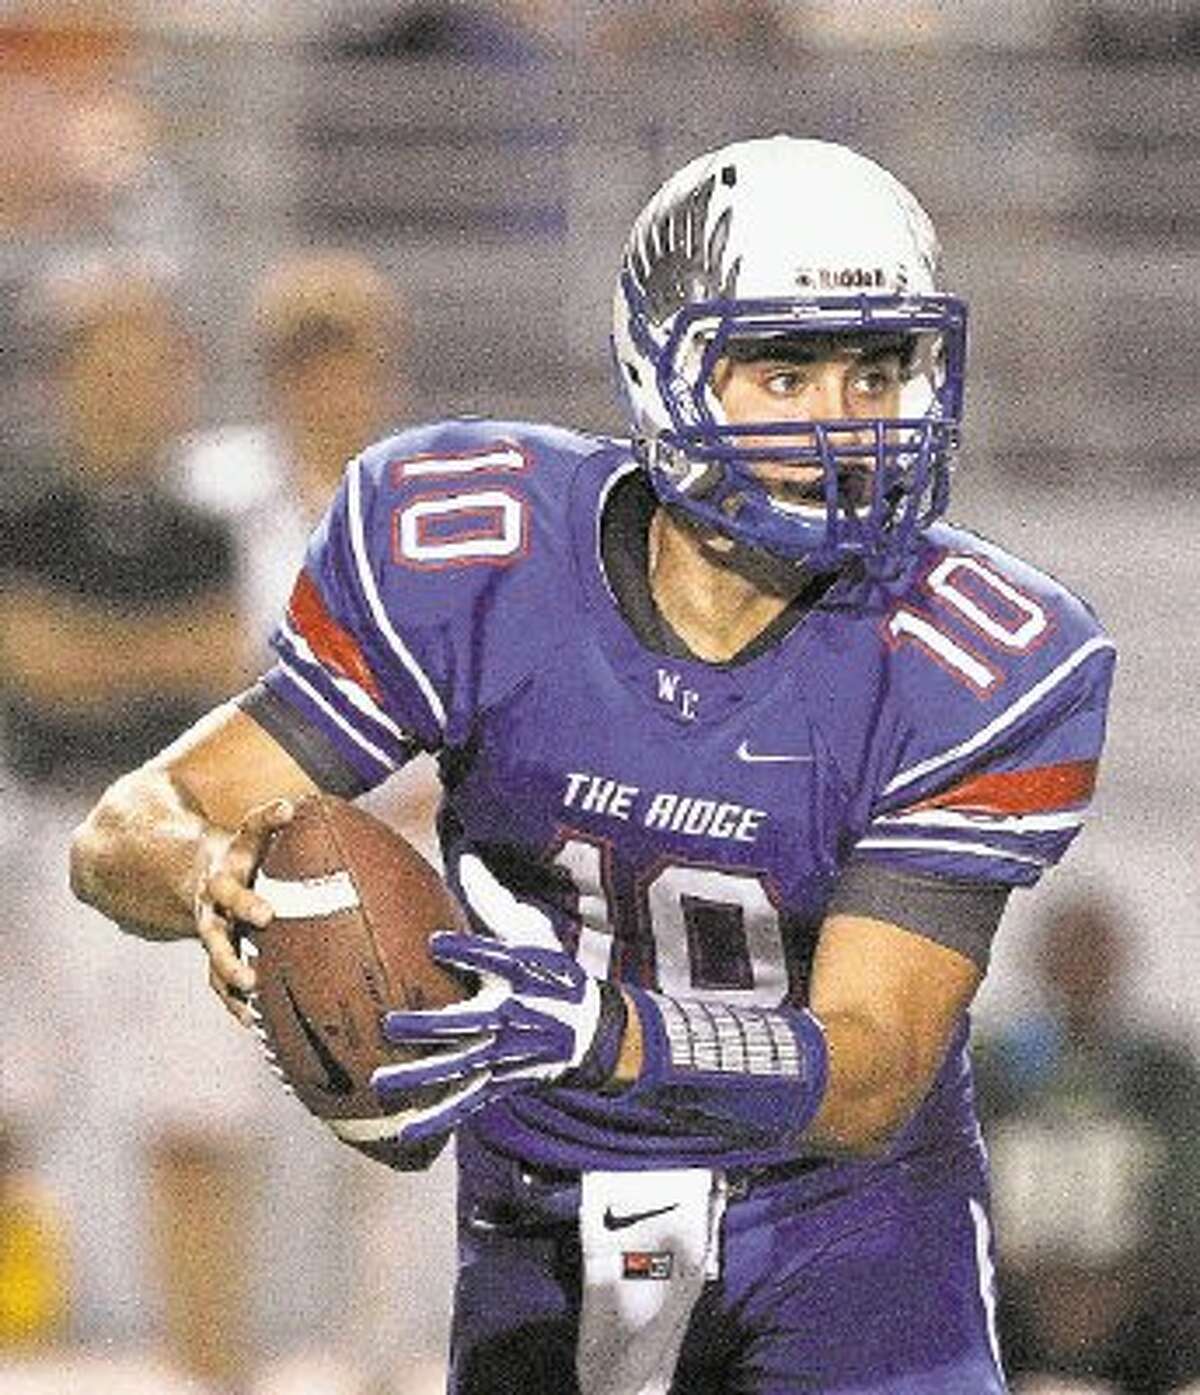 Oak Ridge quarterback Braden Letney won The Courier’s Montgomery County Player of the Week award for Week 7. The sophomore ran for 151 yards and two touchdowns (58 and 69 yards) on six carries and completed 5 of 6 passes for 130 yards and two touchdowns (58 and 25 yards) in a 41-18 victory at Conroe.